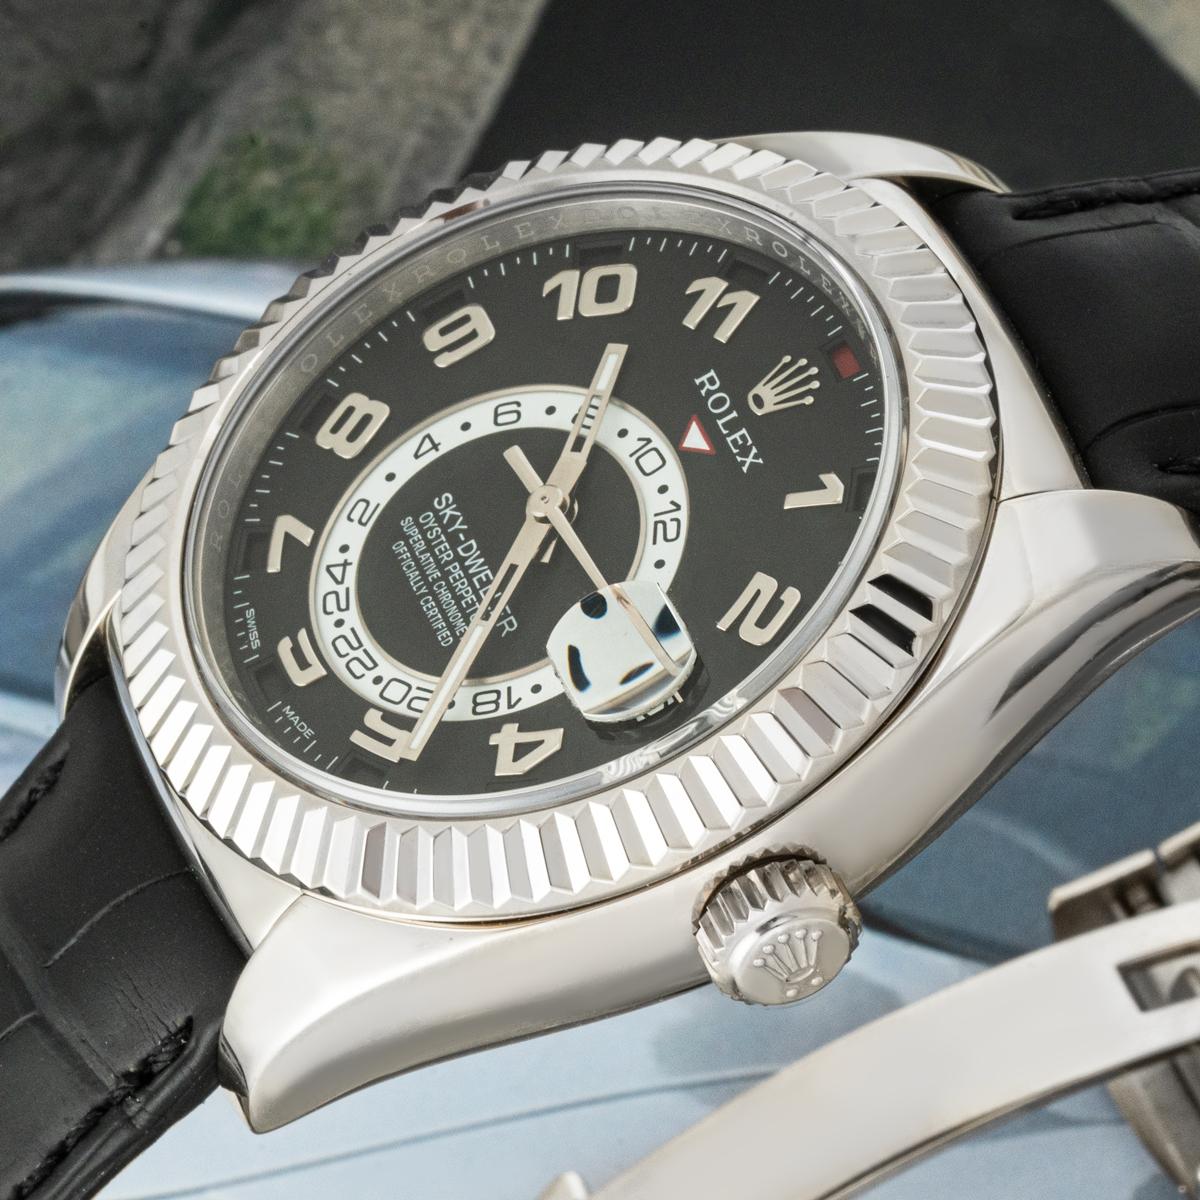 A stainless steel Sky-Dweller by Rolex. Featuring a black dial with a date, a month display via the 12 apertures, and a 24-hour display as well as a second time zone, which can be controlled using the fluted white gold bi-directional rotatable ring